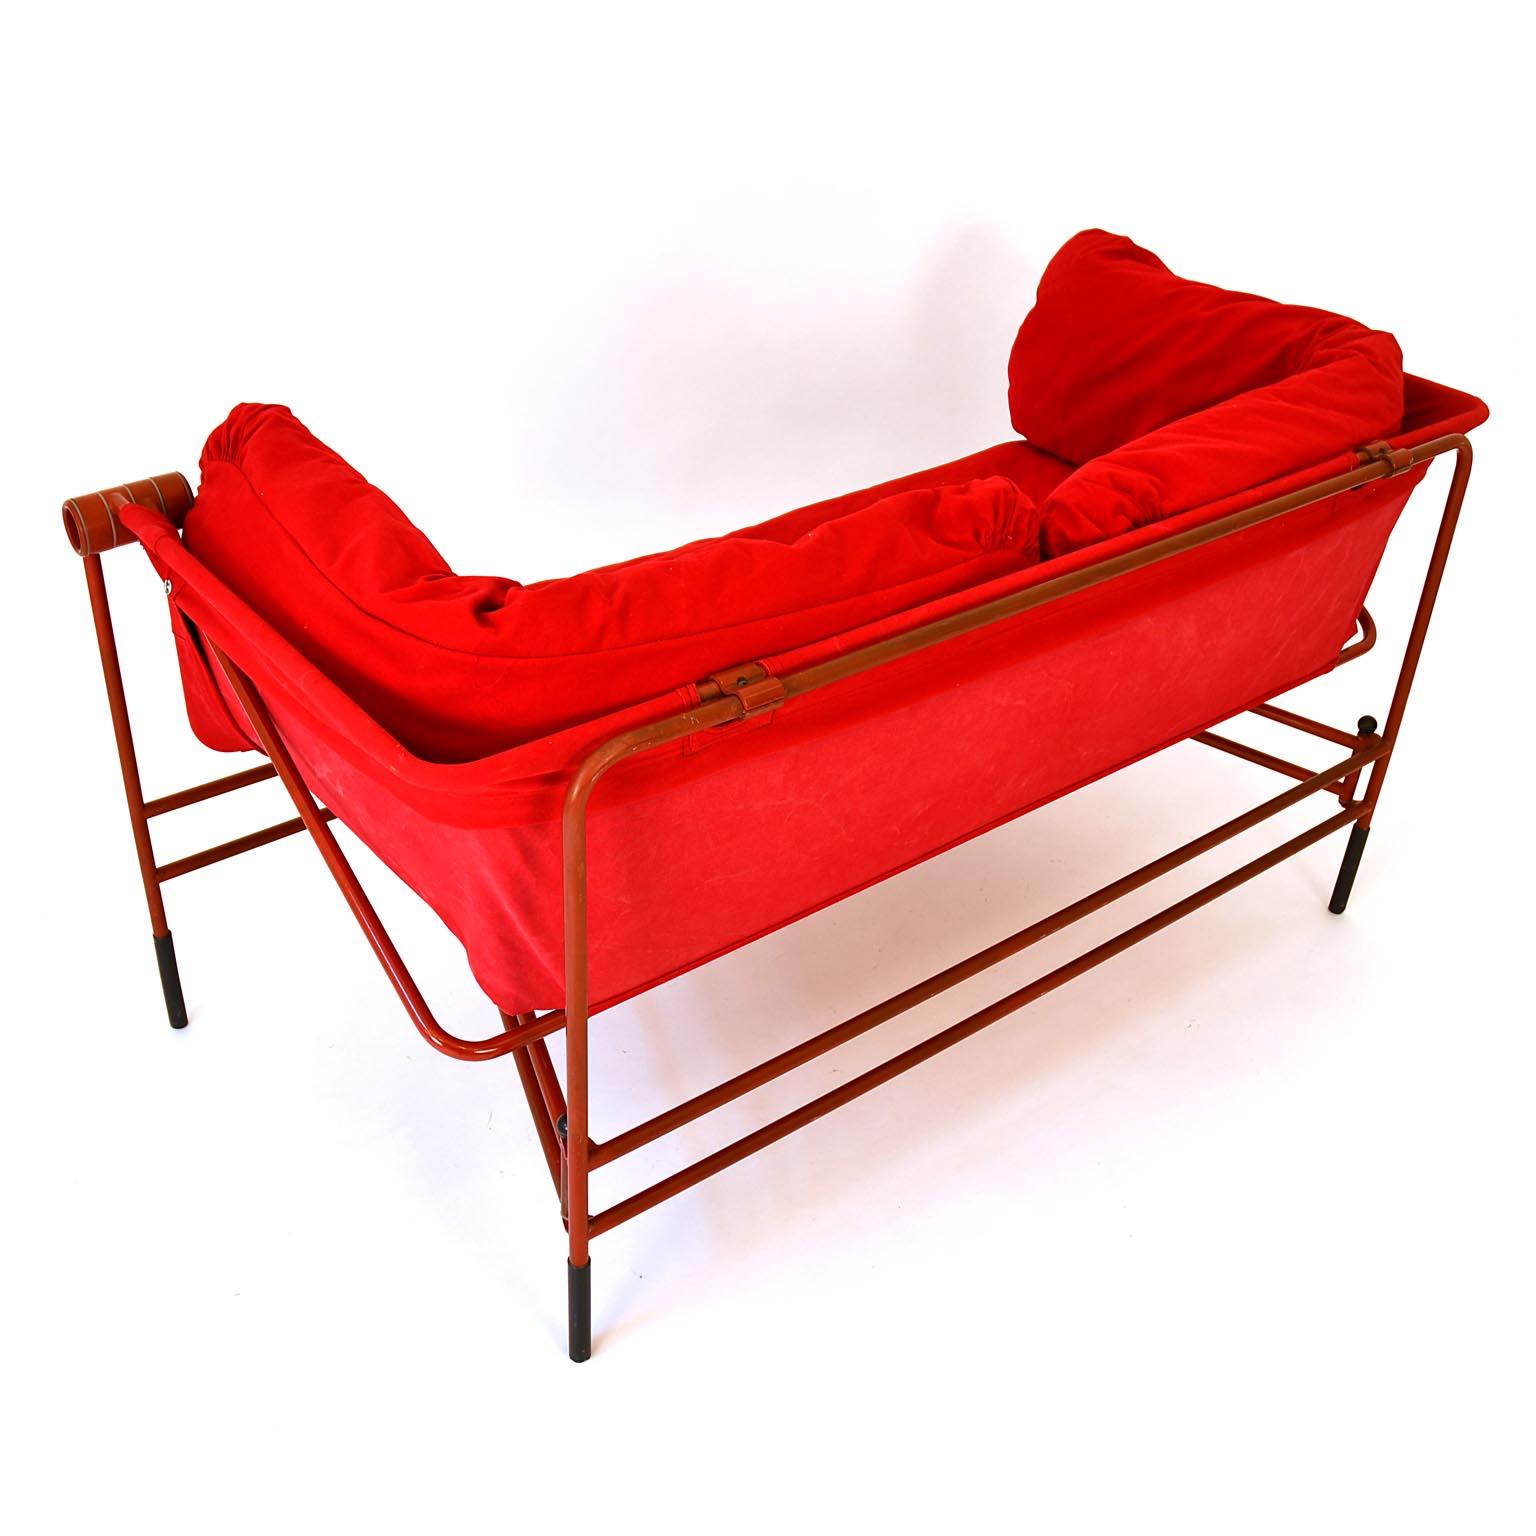 Bench Cabriolet 1980s Red Fabrik Metal Bruno Rota Italy 4